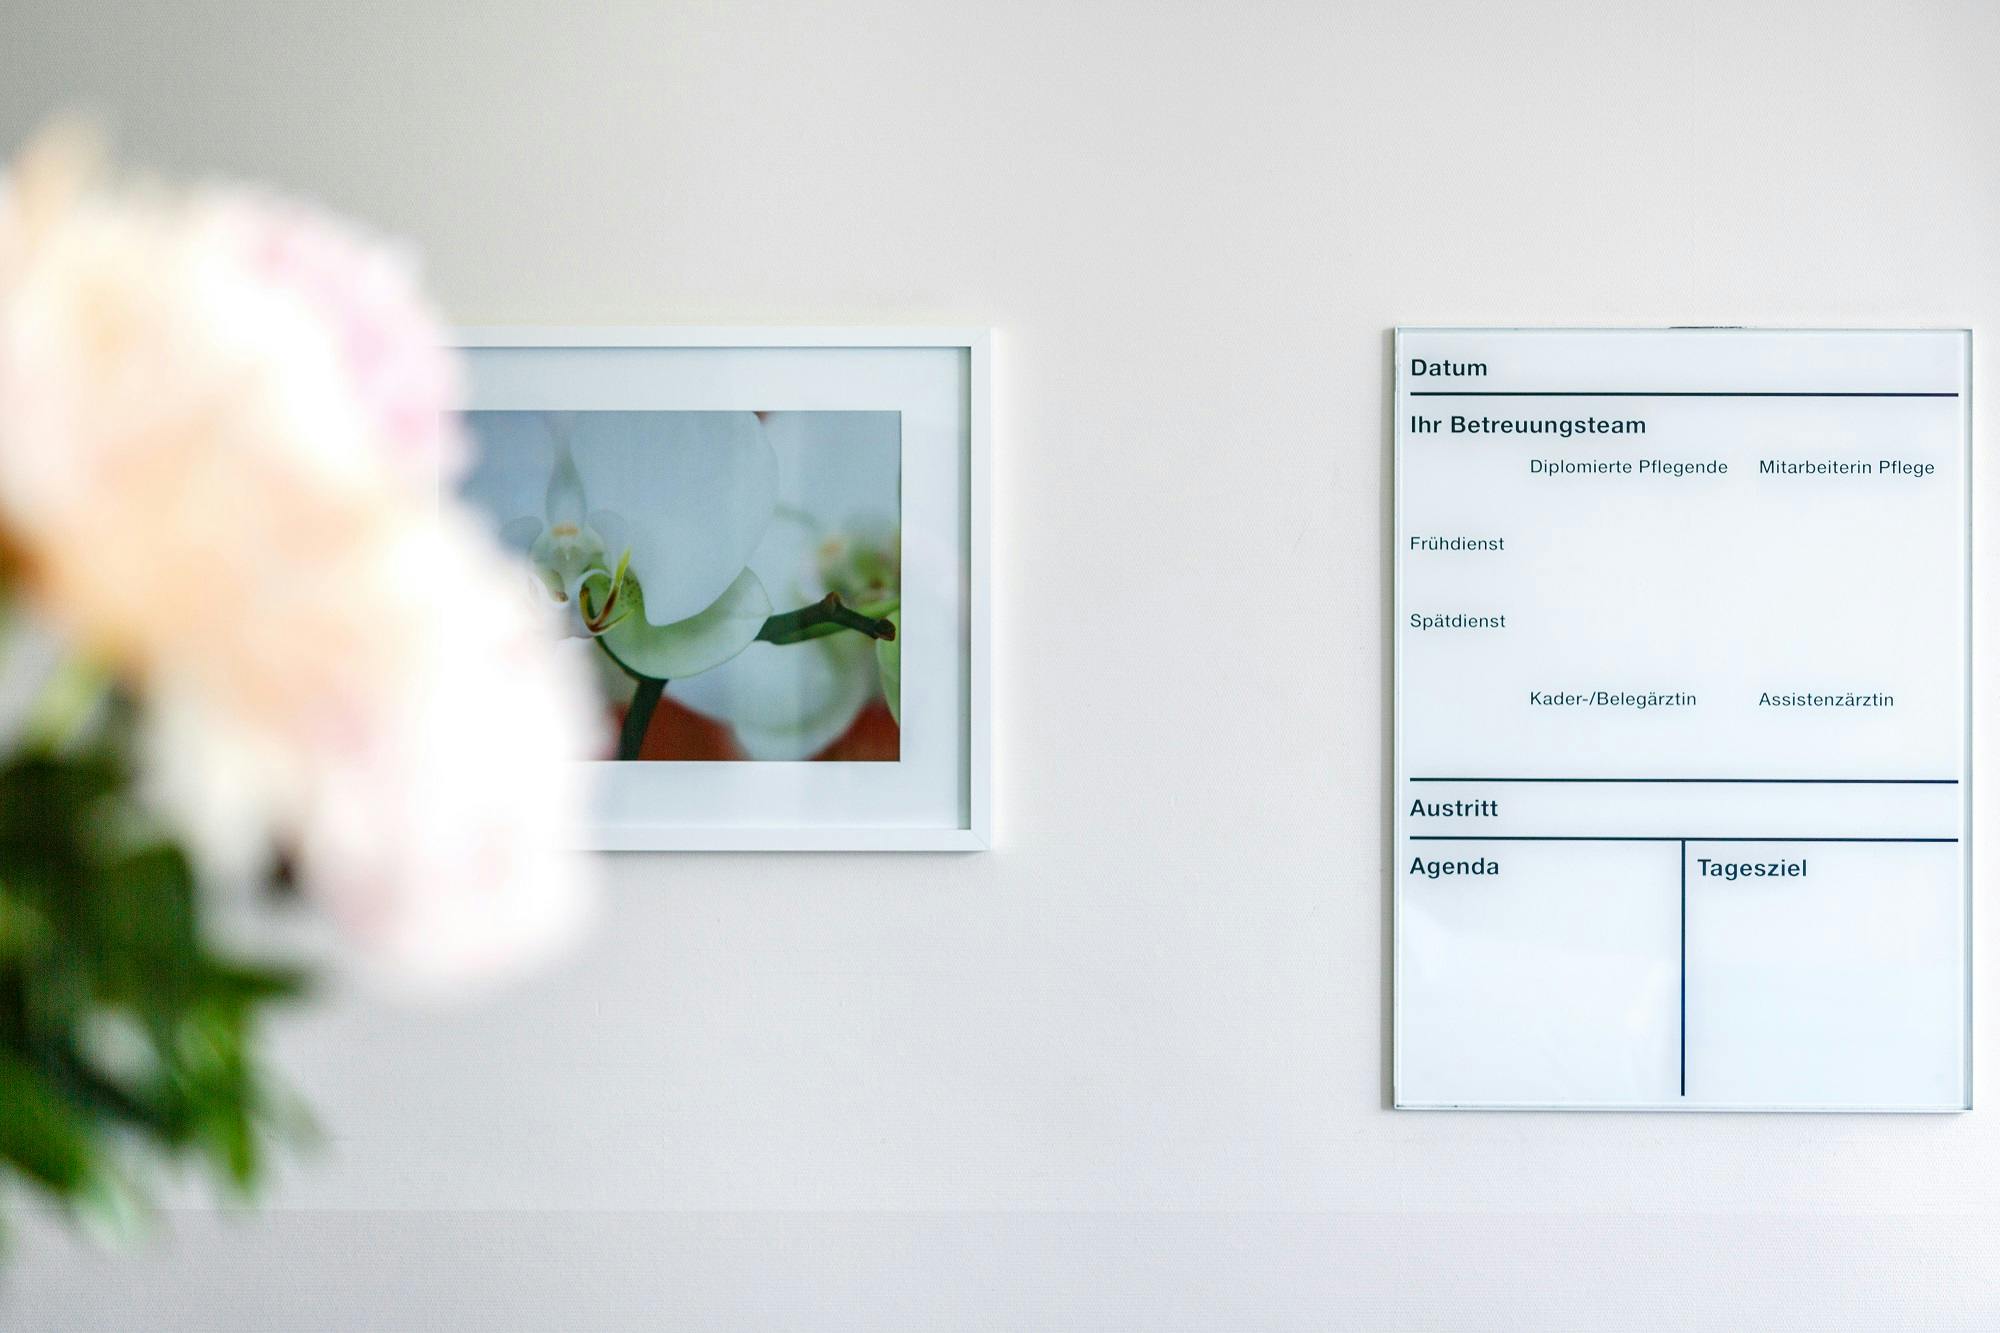 Alternative description: Wall with a framed picture of a flower next to an information board in an interior.